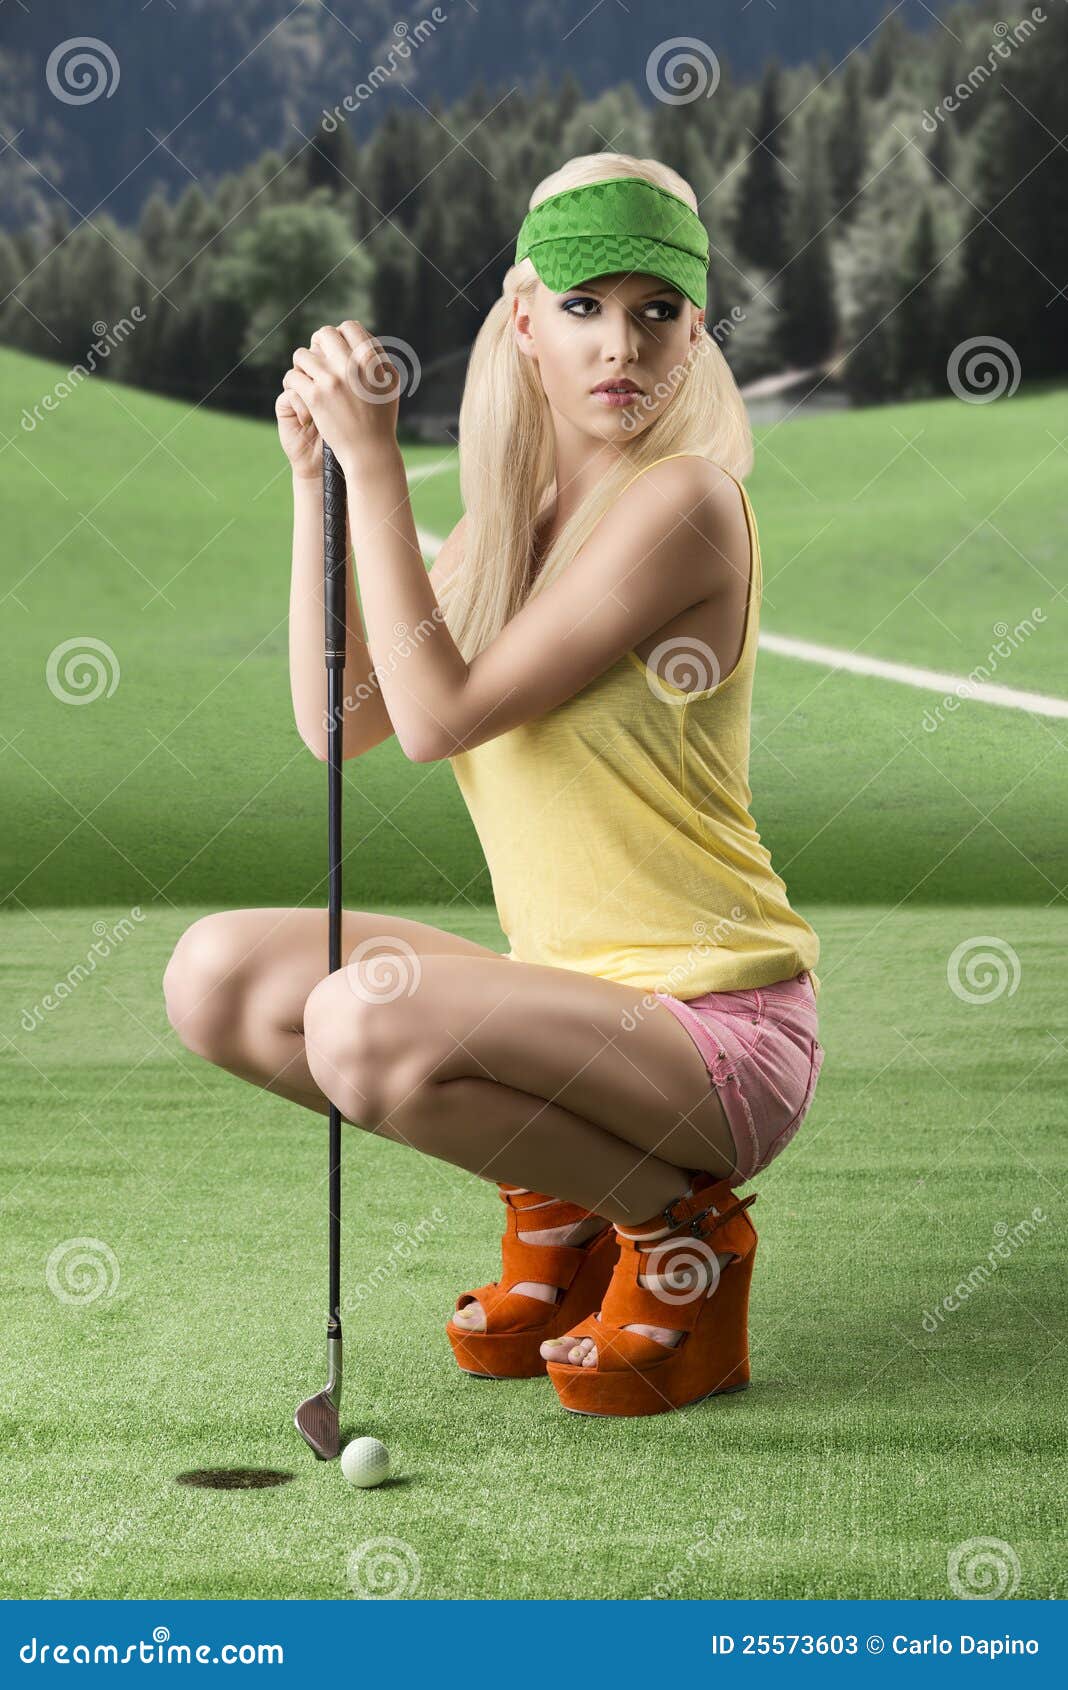 this girl is so hot z golf